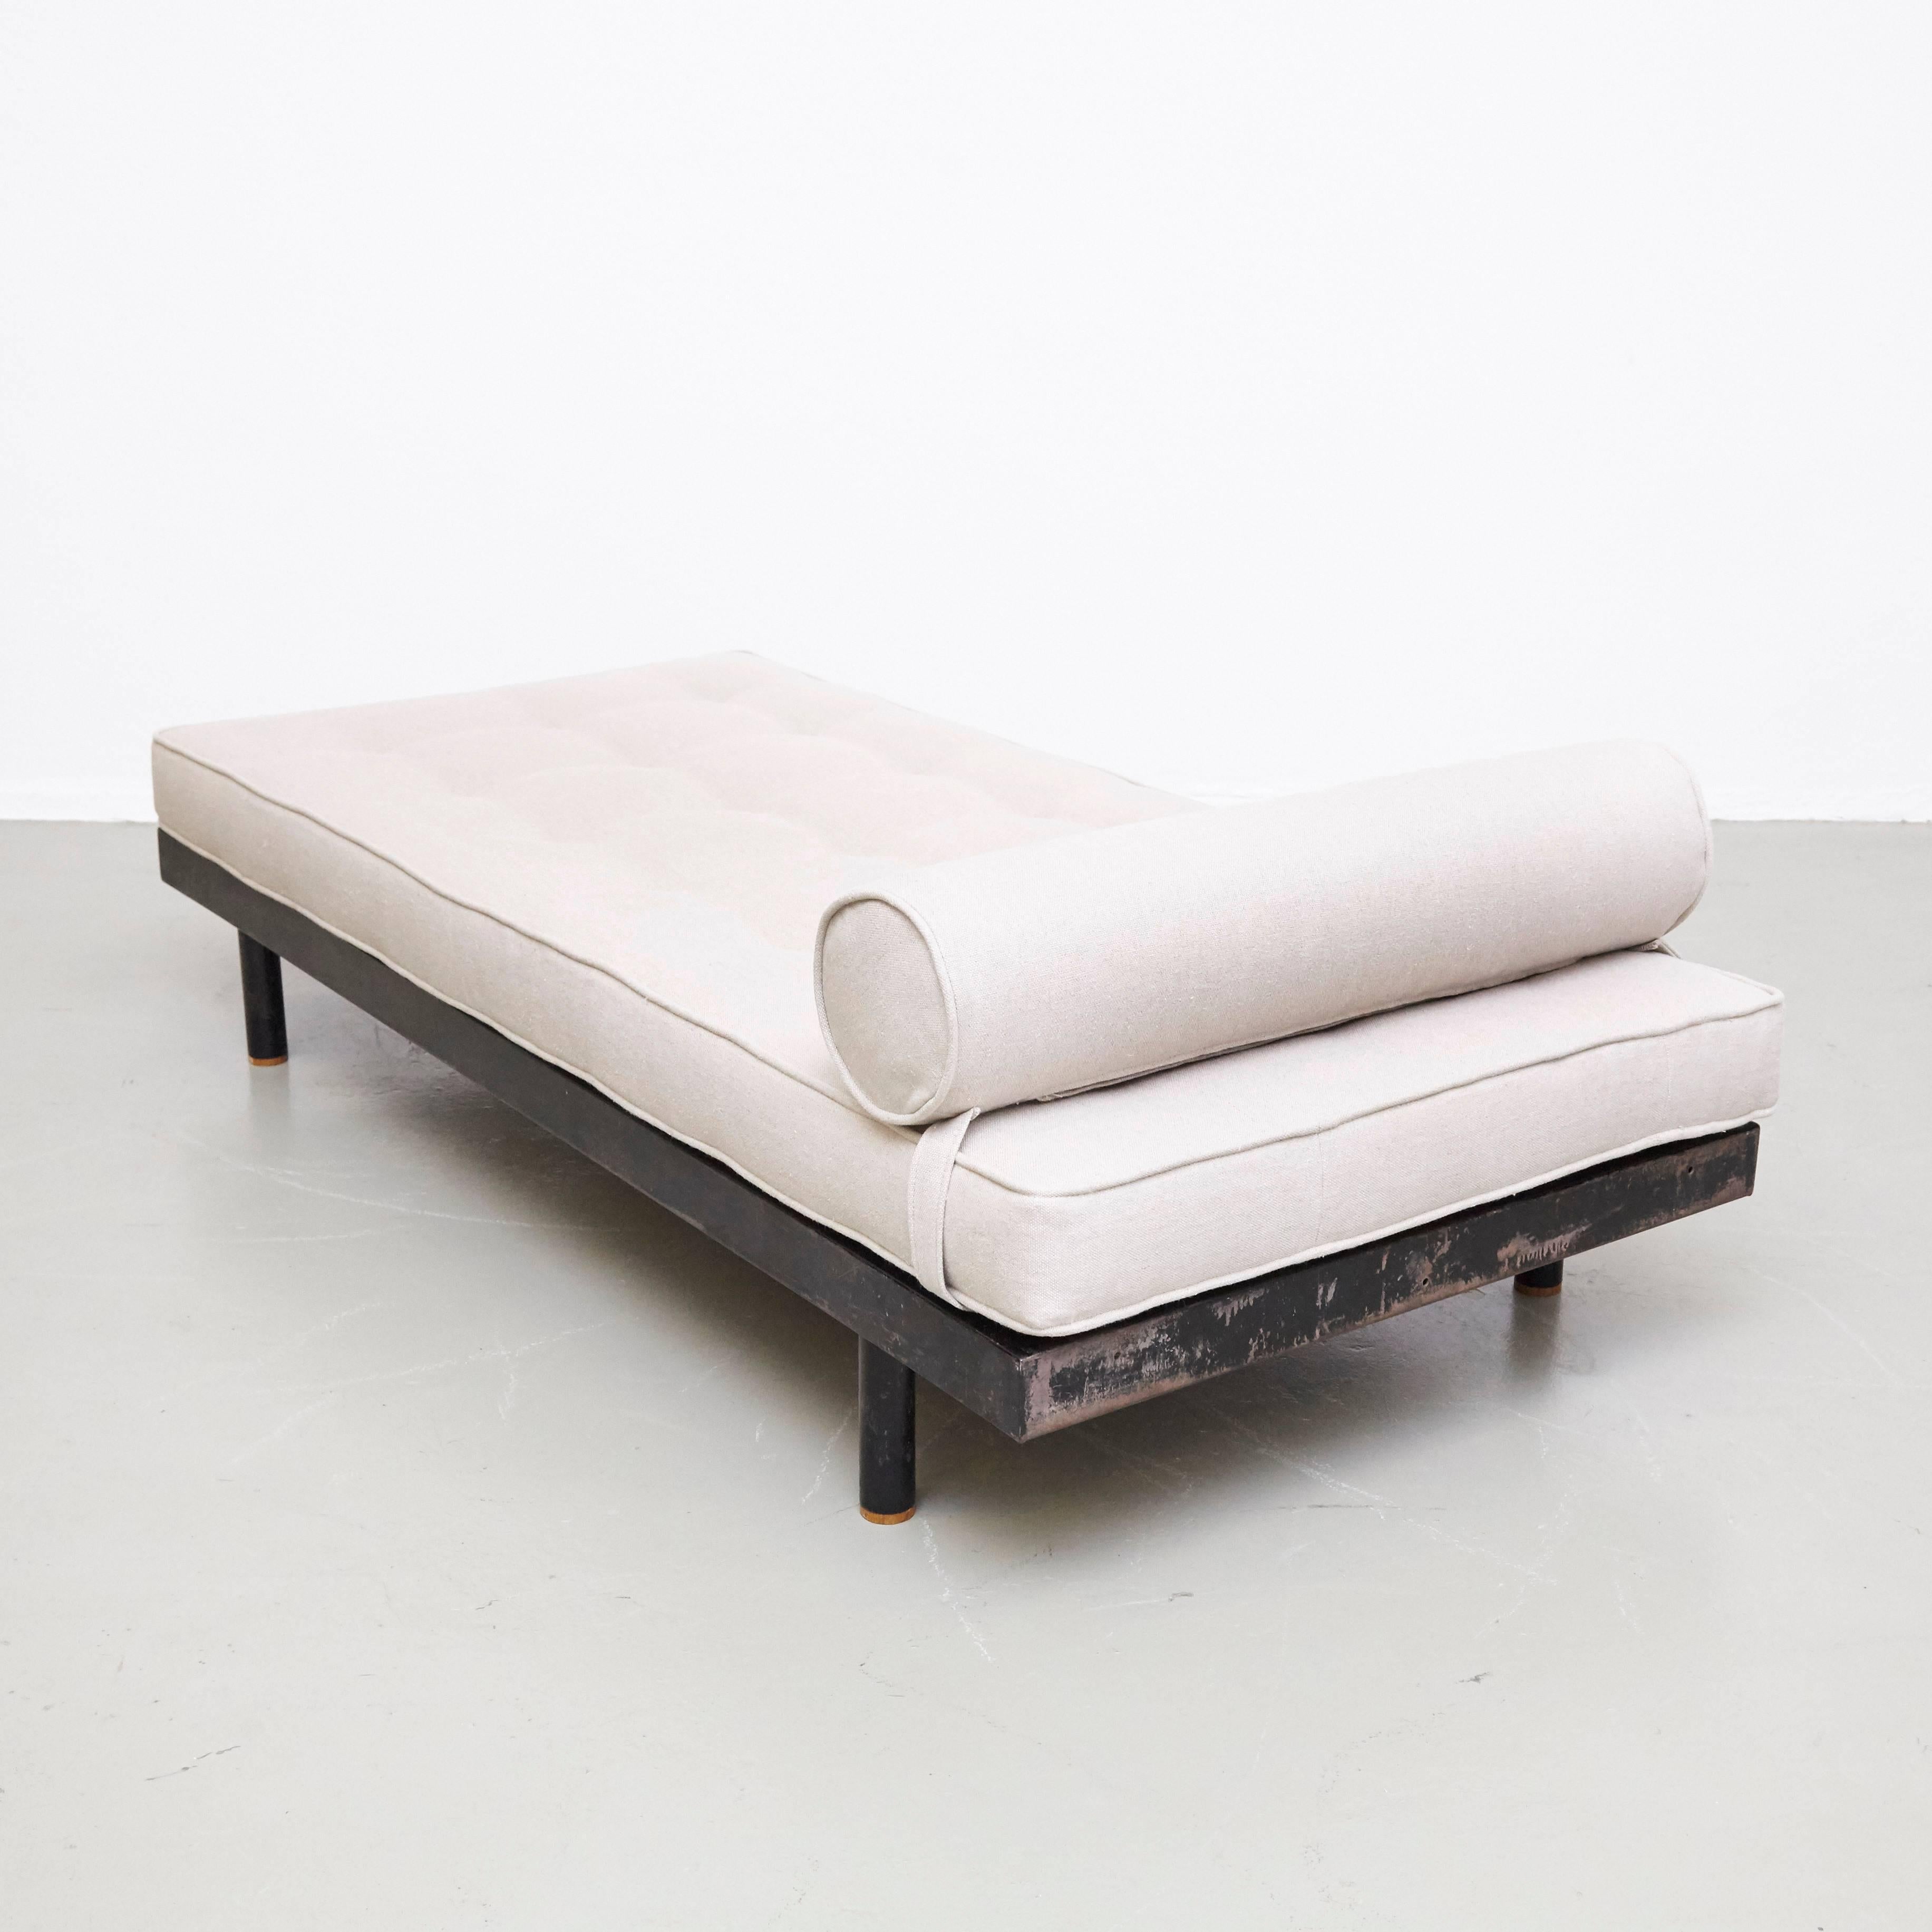 Jean Prouve Mid Century Modern Metal Upholstery SCAL French Daybed, circa 1950 (Mitte des 20. Jahrhunderts)